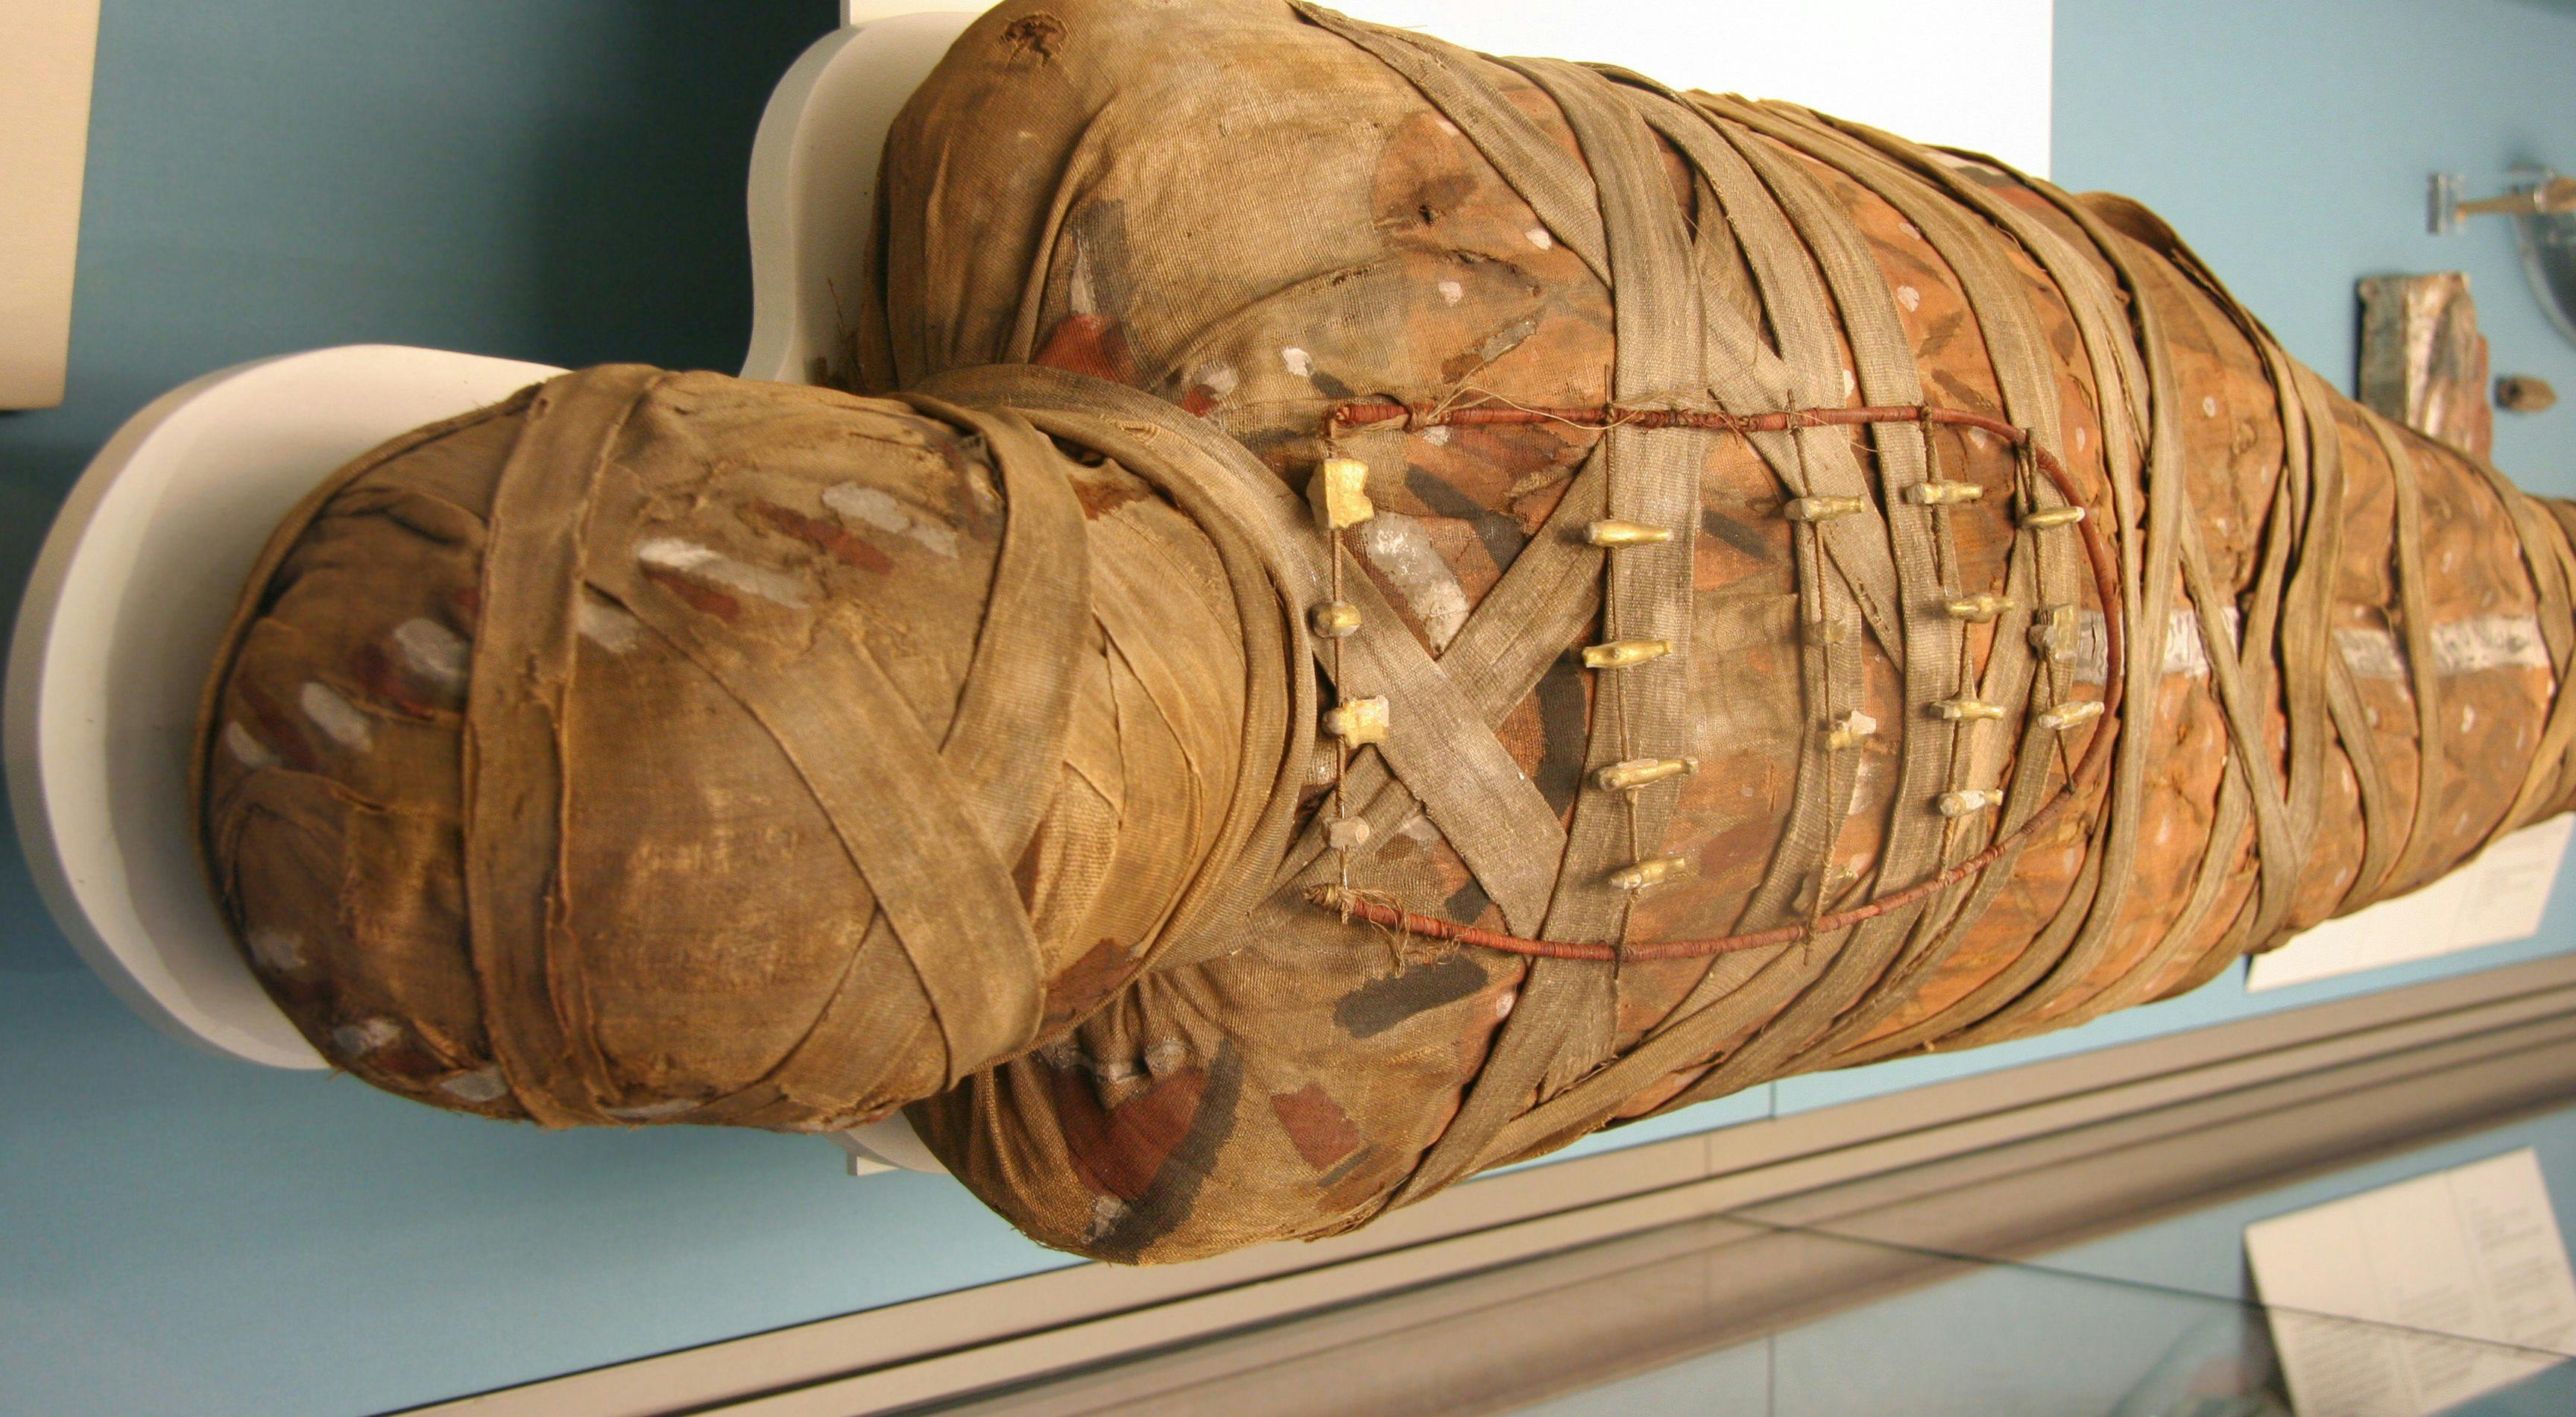 Oldest Known Cancer Cases Found in Egyptian Mummies